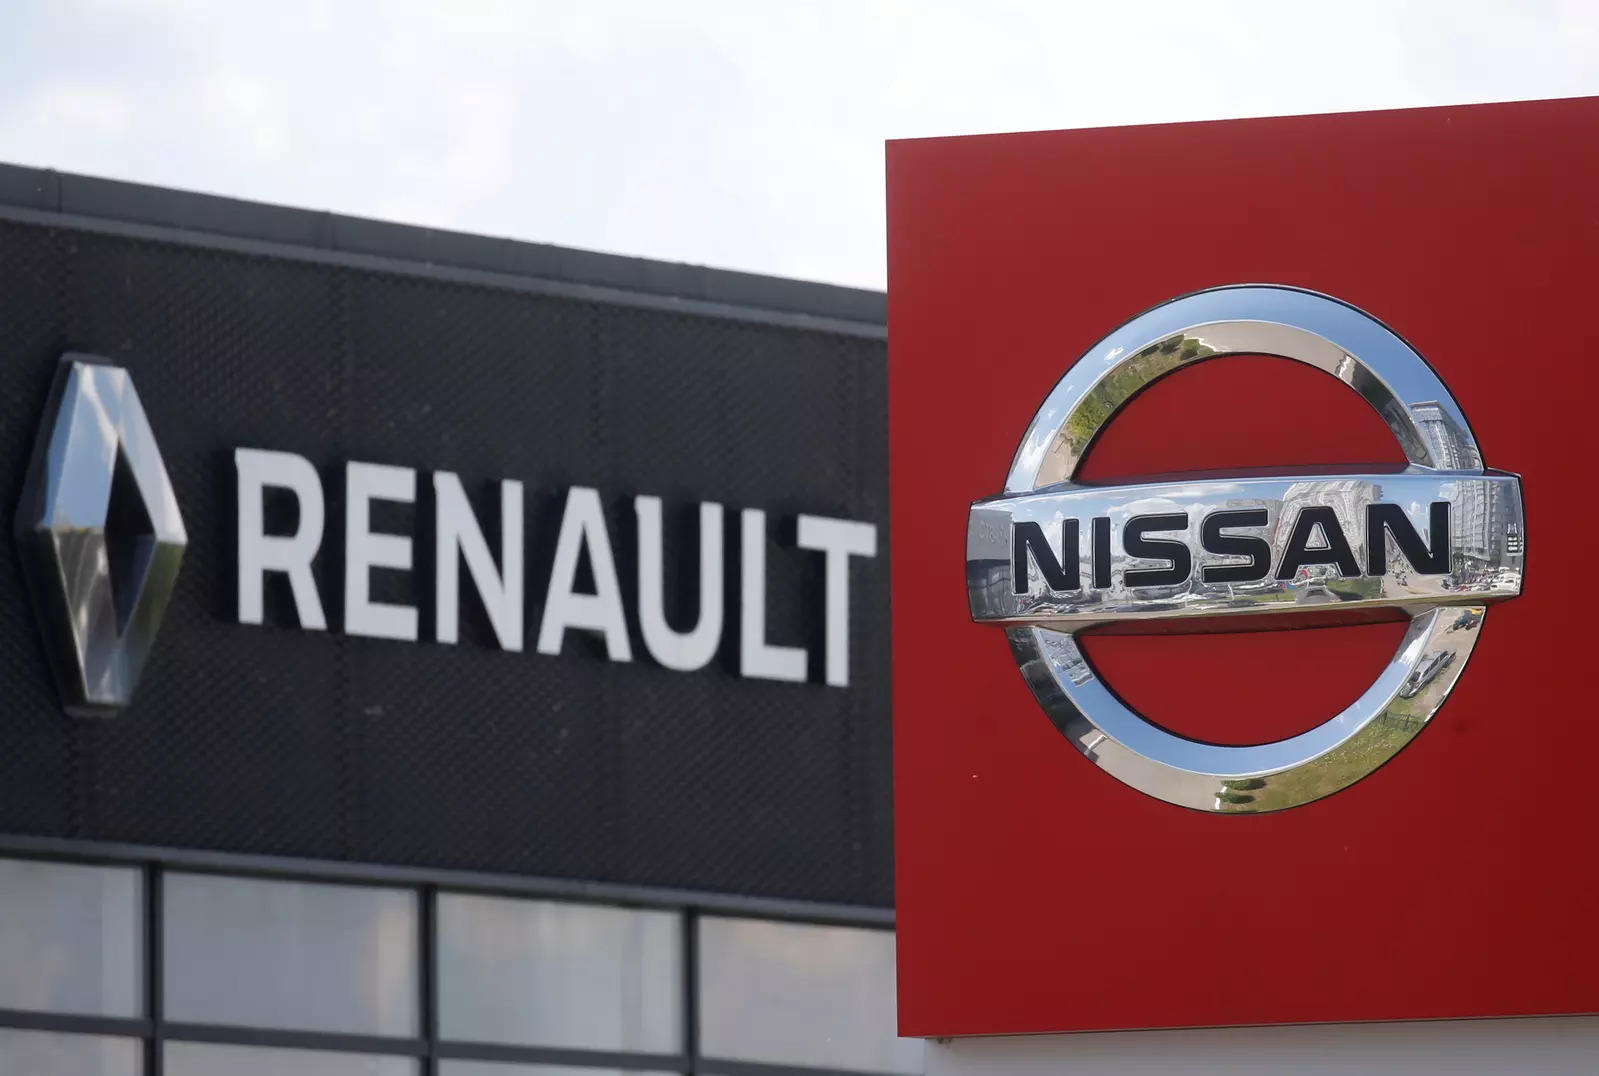 Workers at the Renault-Nissan plant in Chennai filed an industrial arbitration suit demanding 20,000 rupees as a monthly interim settlement after the expiry of a previous wage agreement in March 2019.